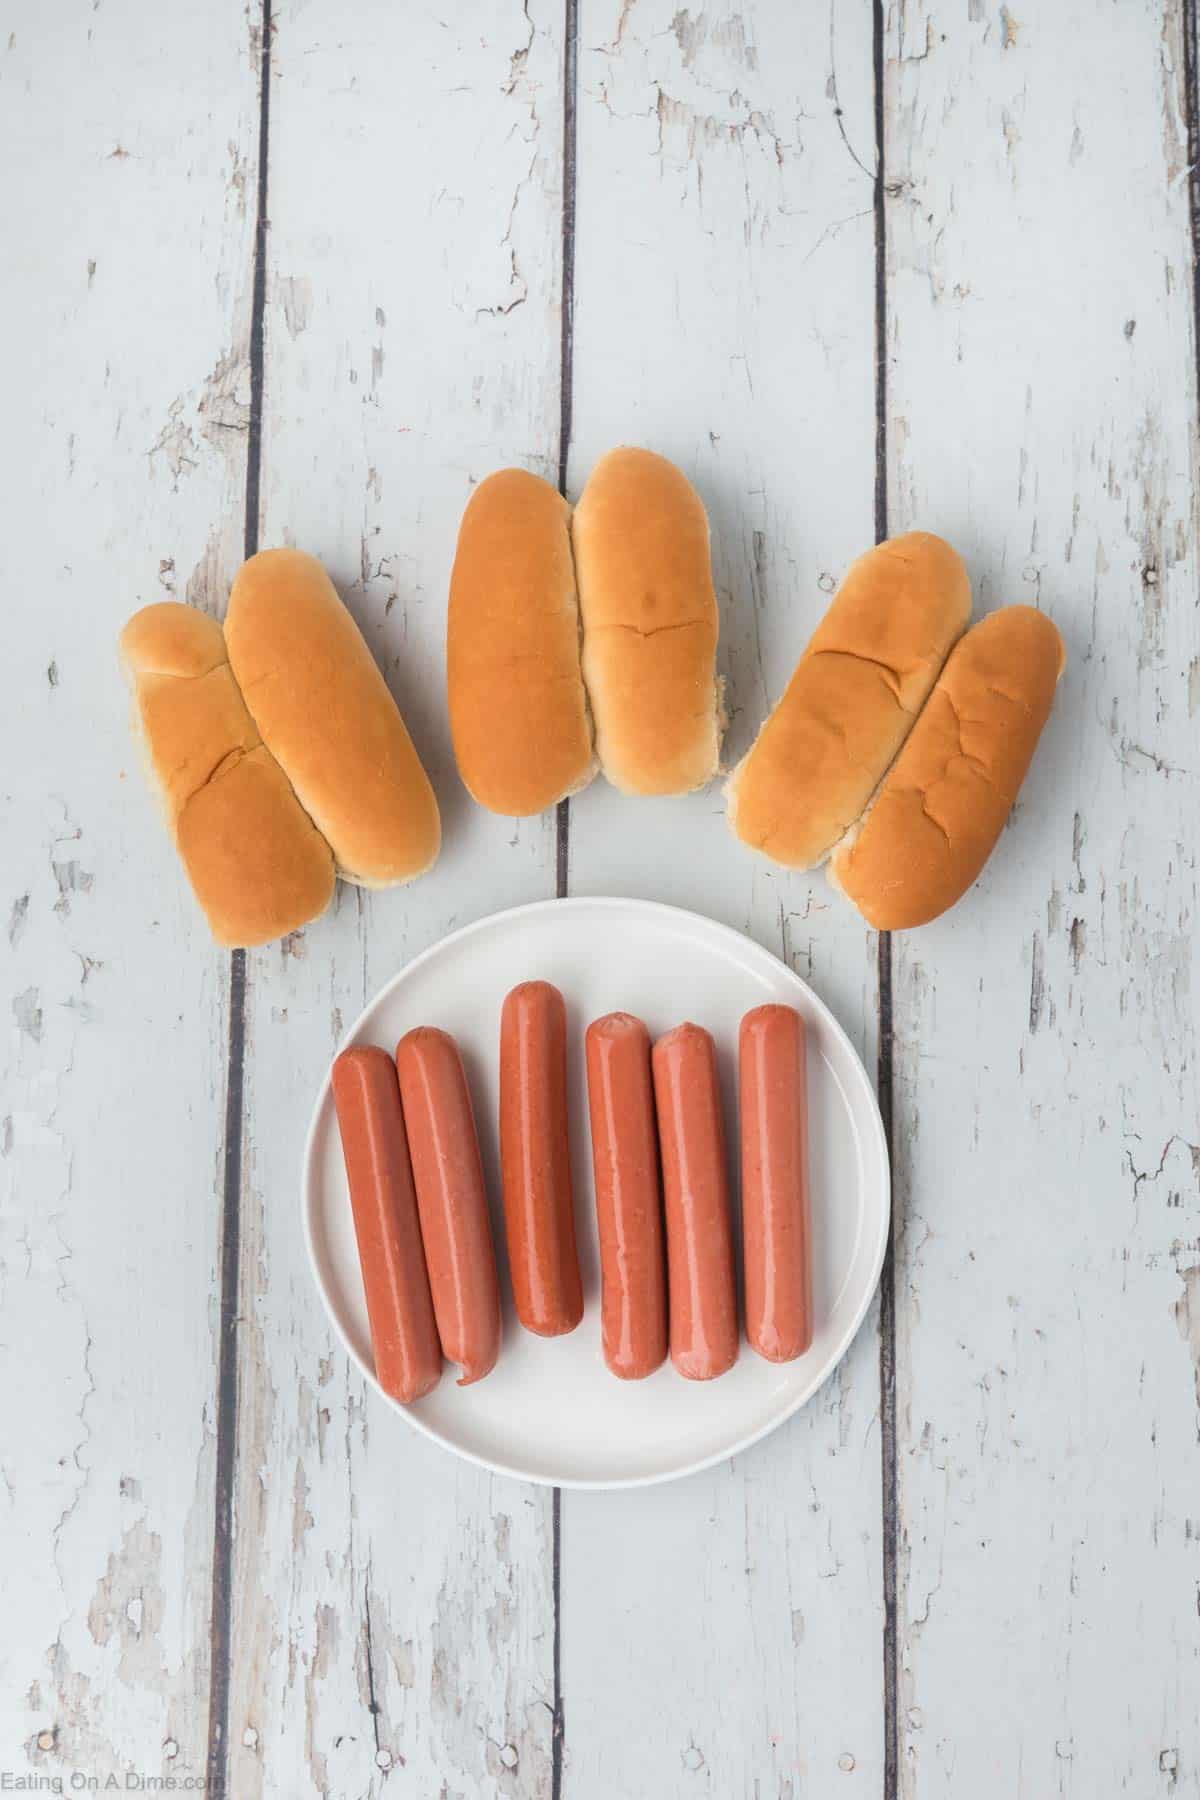 Hot dogs buns and a plate of hot dogs